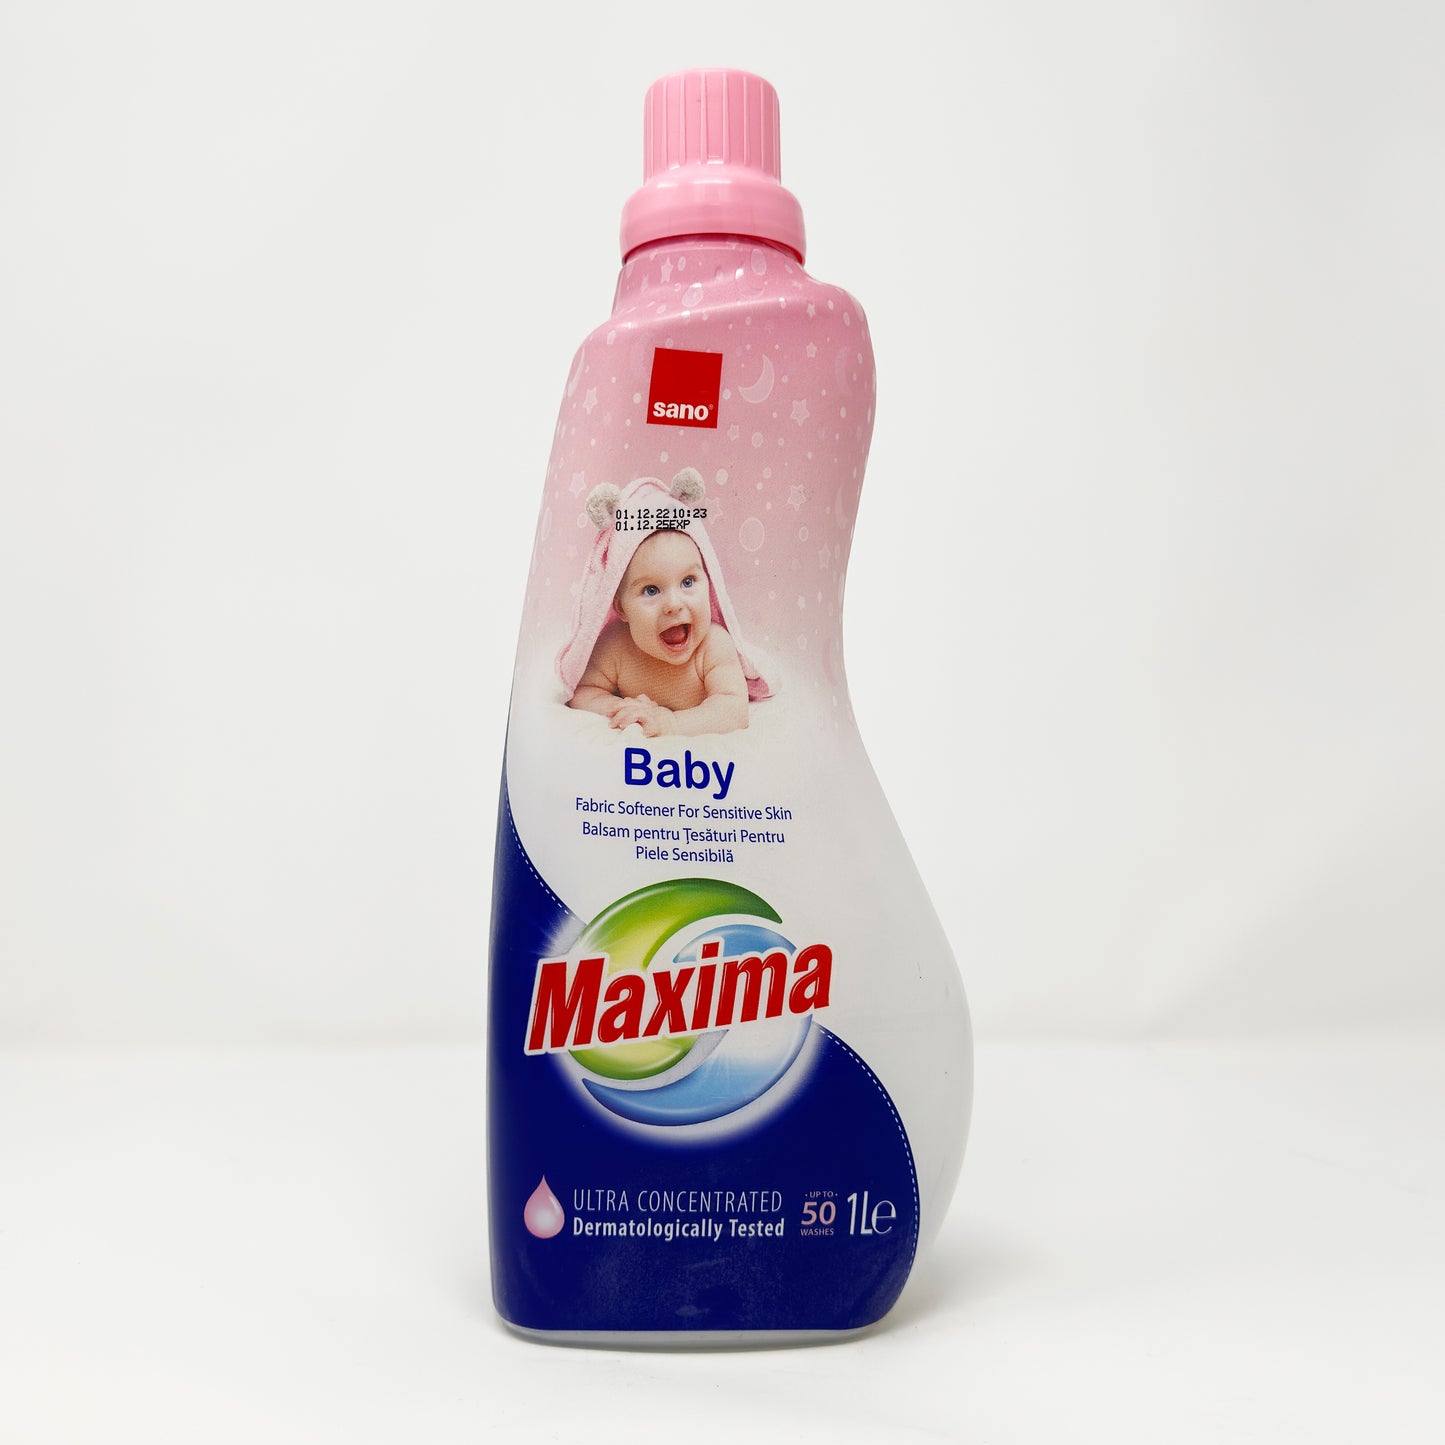 Sano Maxima Baby Softener Ultra Concentrated 1L